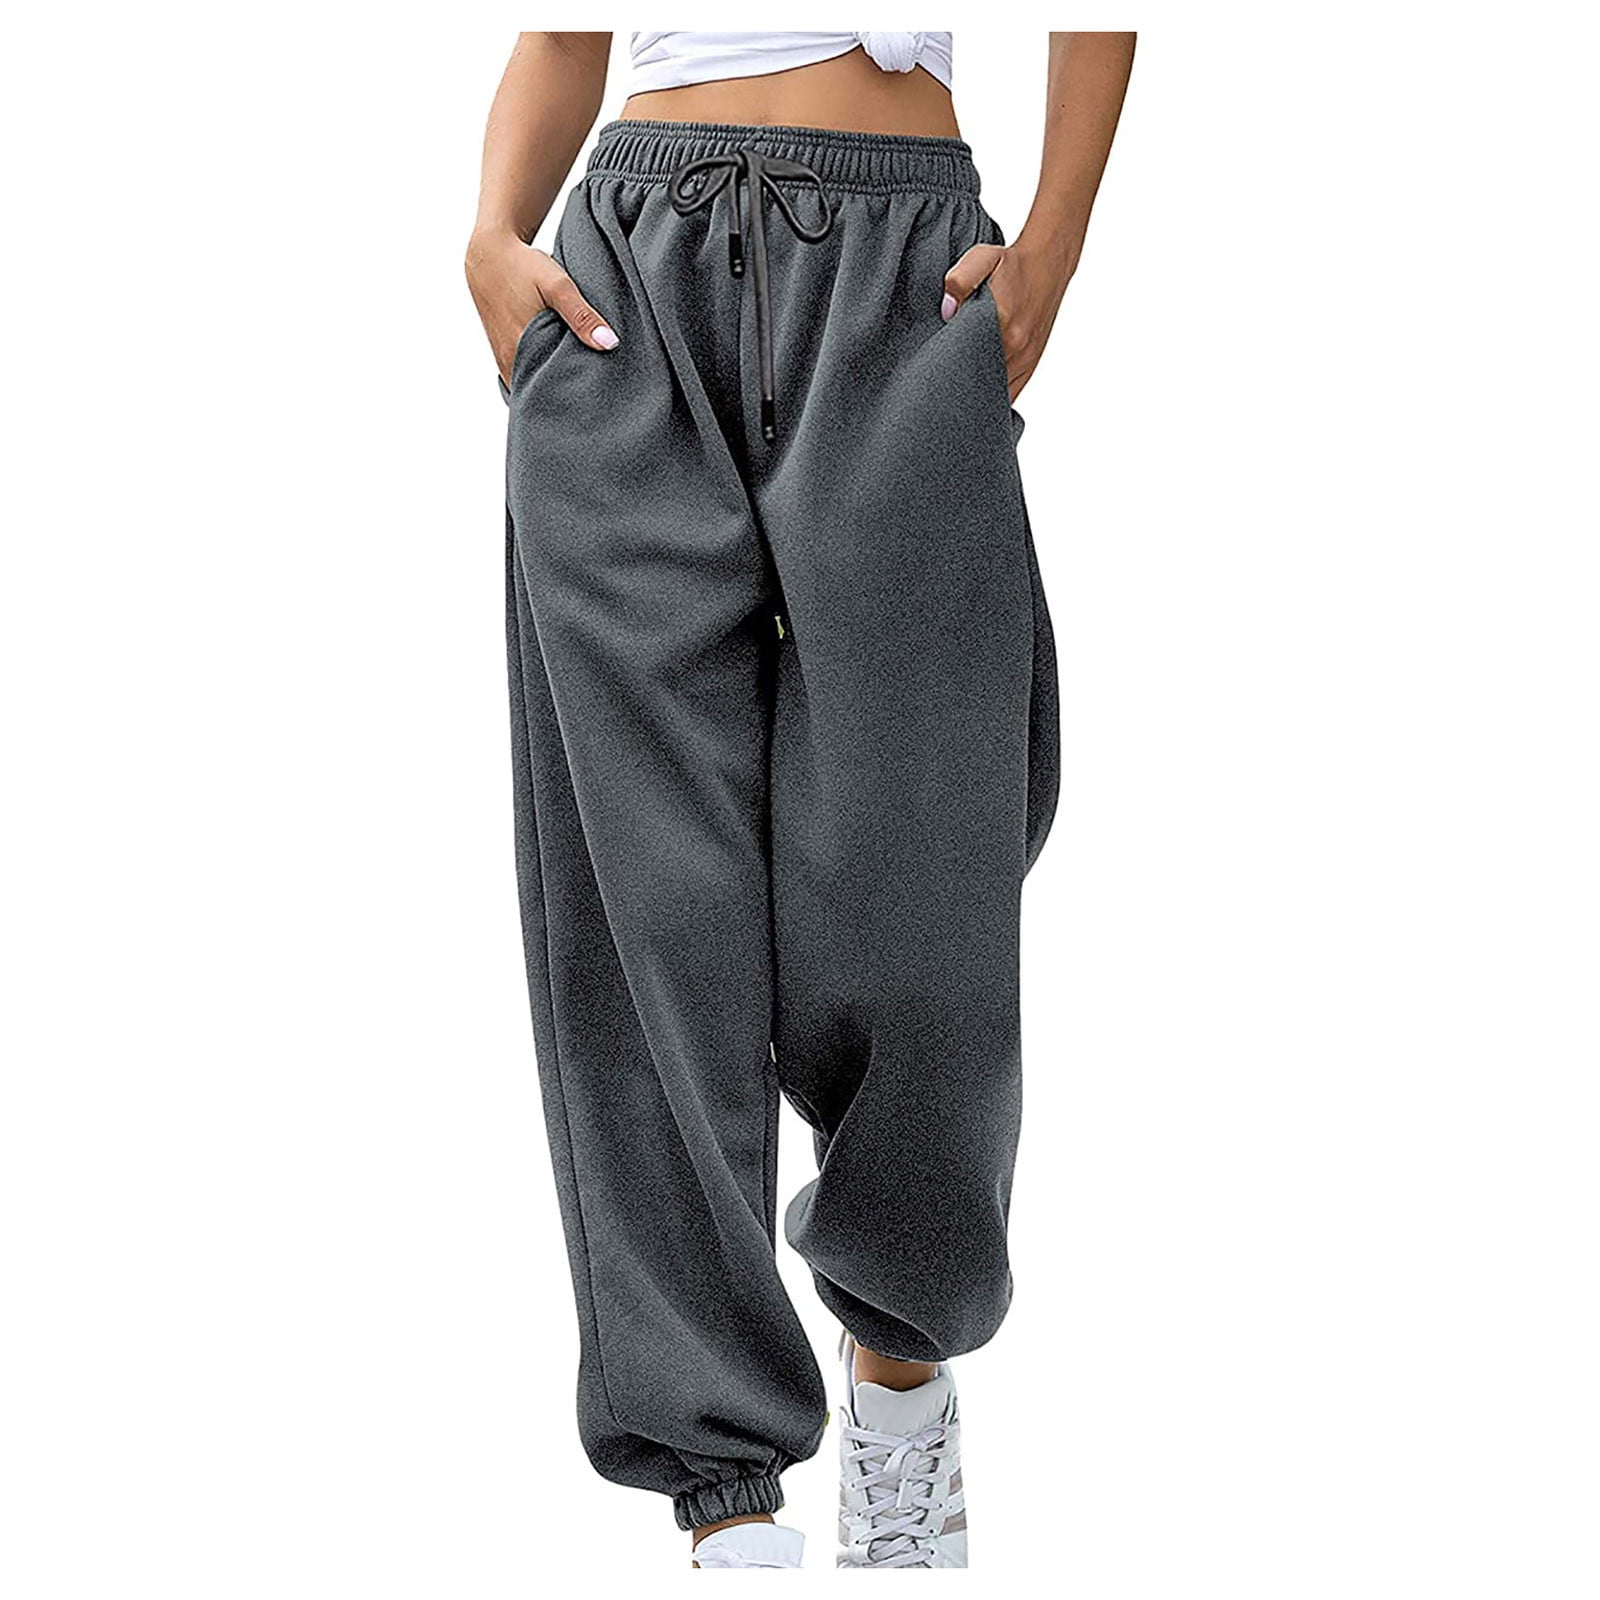 Gboomo Womens Plus Size Sweatpants Loose Athletic Jogger Pants High Waist  Lounge Trousers with Pockets